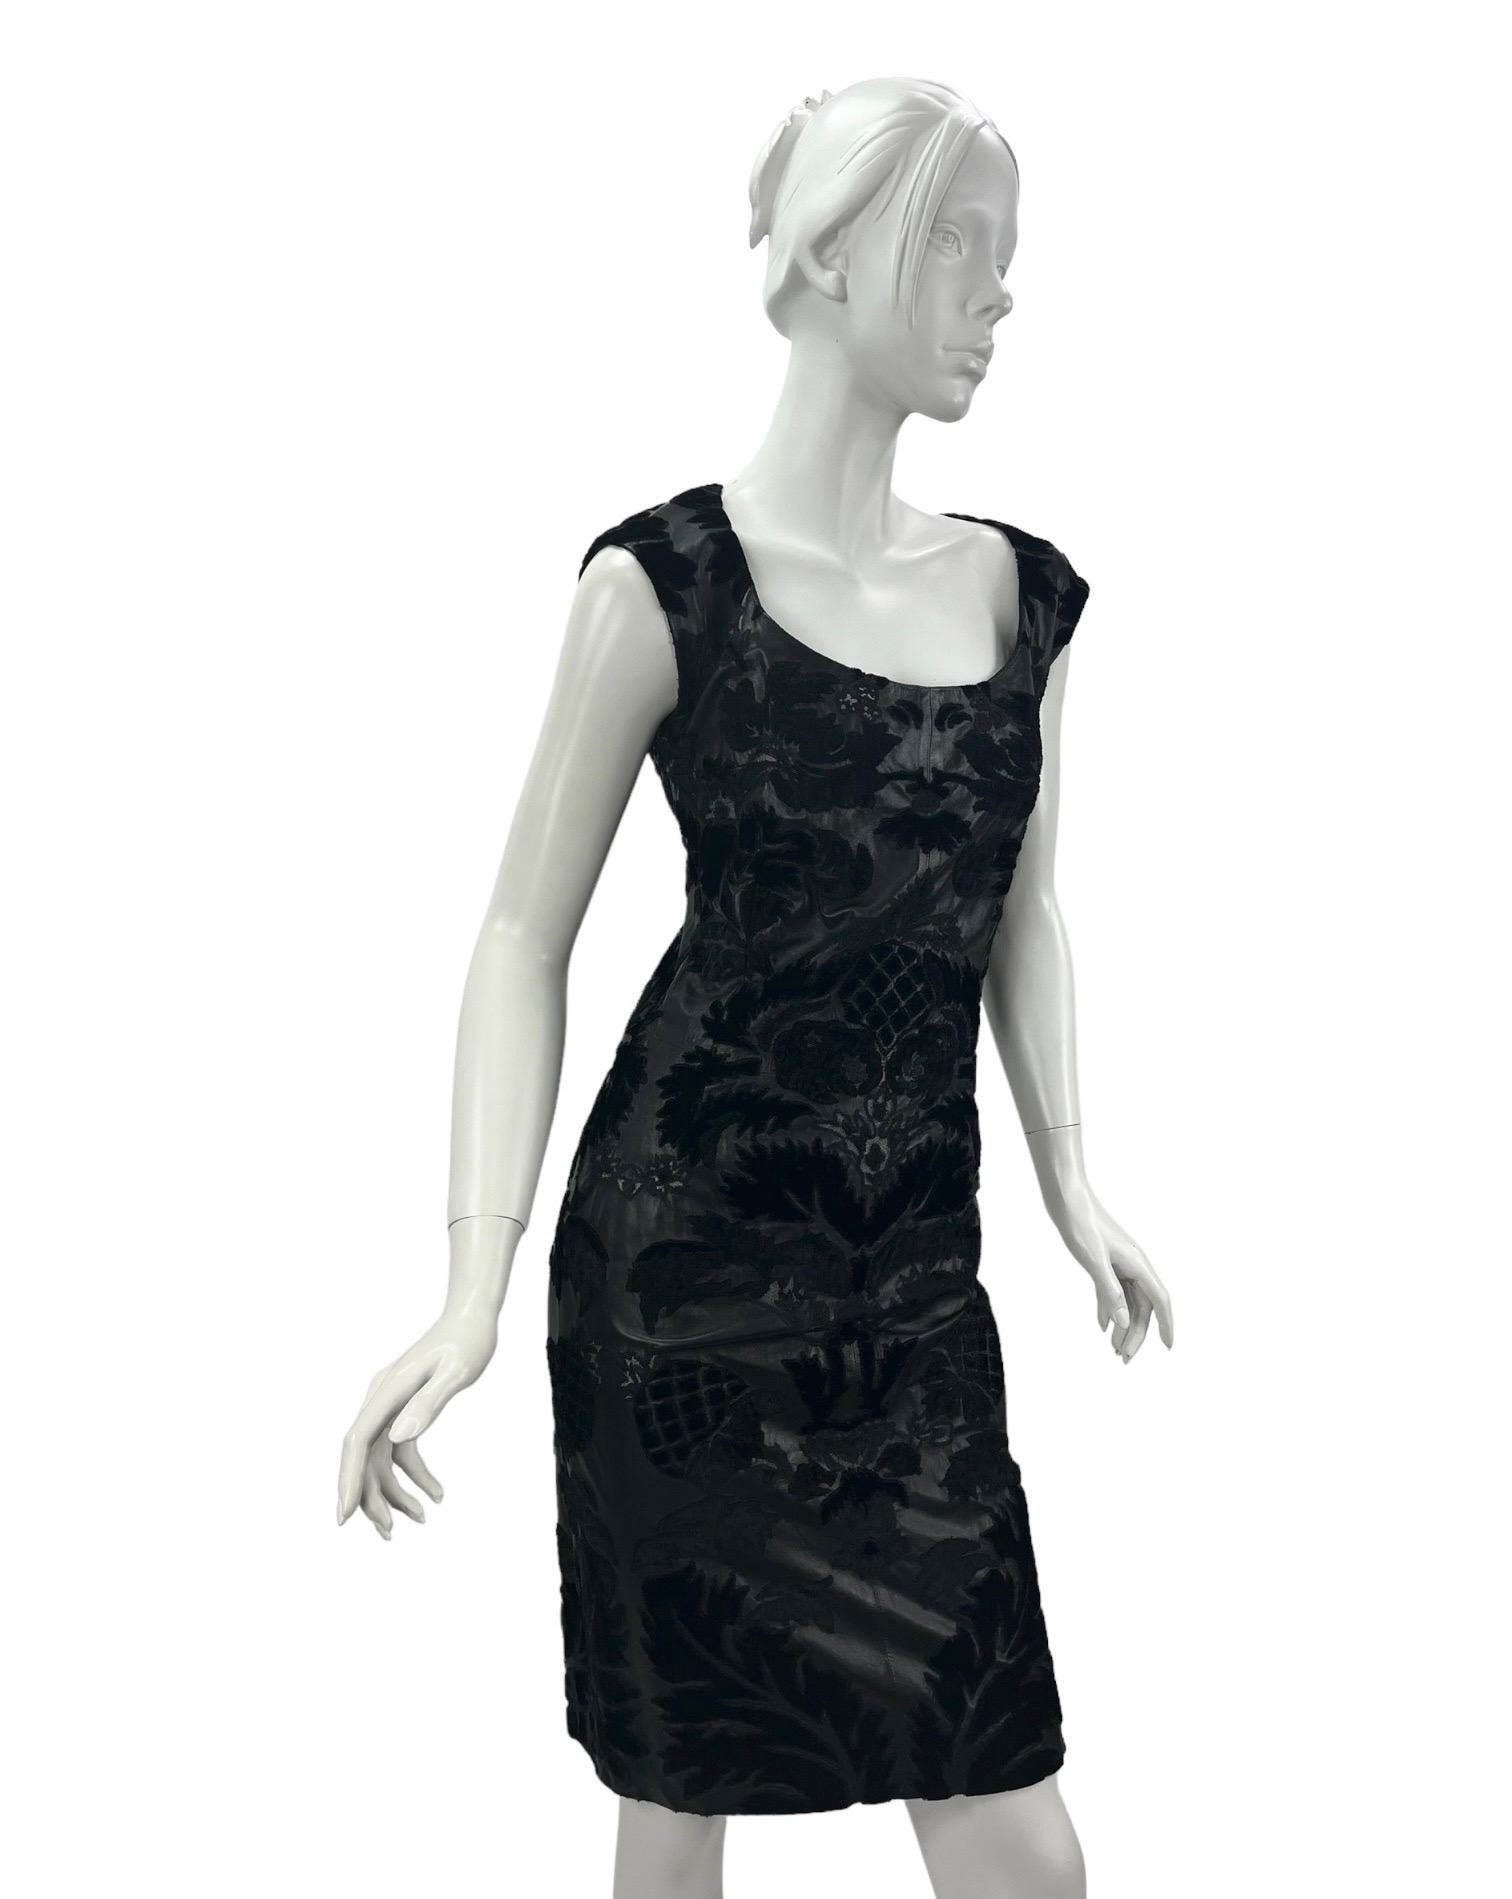 Vintage Tom Ford for Yves Saint Laurent Rive Gauche Black Embellished Dress - Super Rare !!!
F/W 2002 Runway Collection
FR Size 36 - US 4
Black Genuine Leather, Rich Black Velvet Application, Cut-out Details with Tulle inserts.
Fully Lined in Tulle,